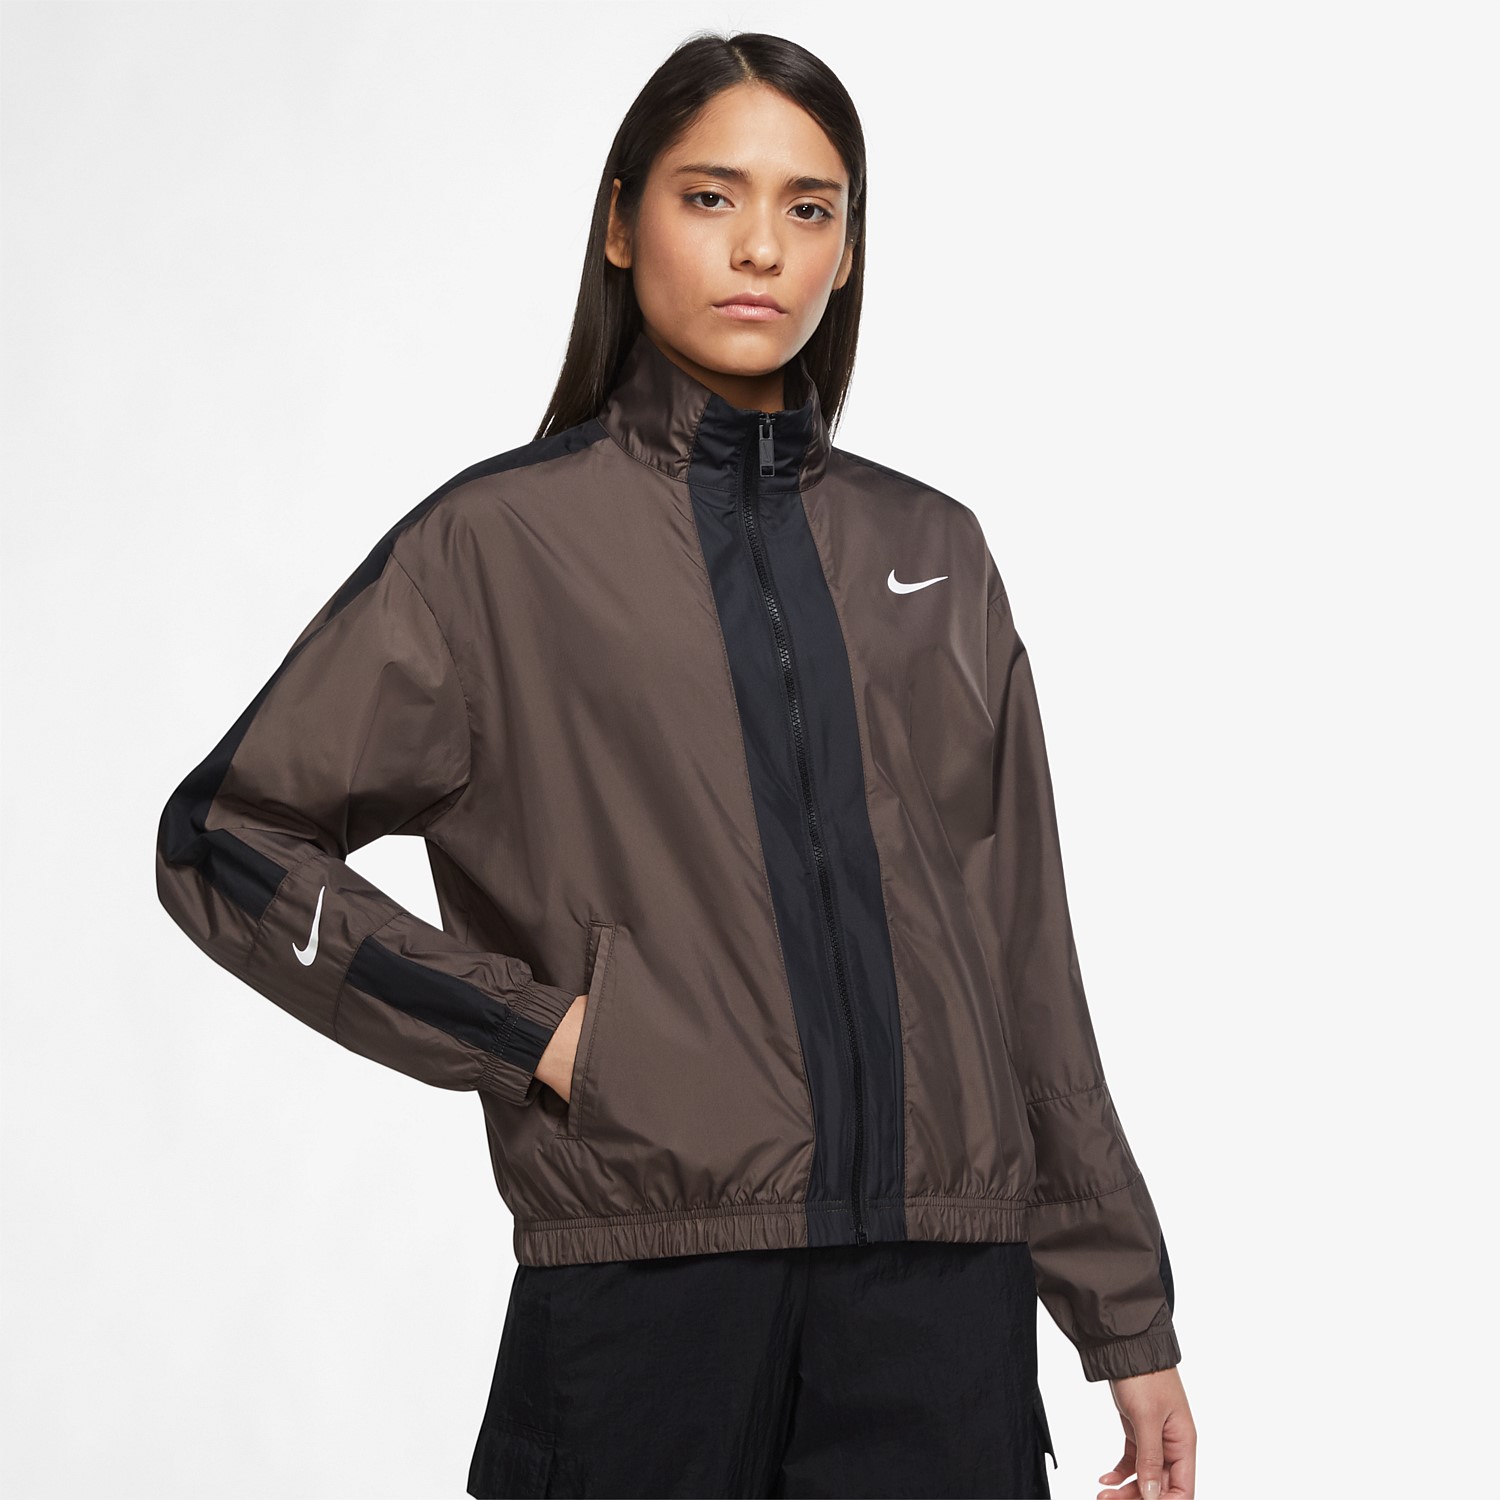 Boxing Day SS 2022 - Sportswear Repel Jacket